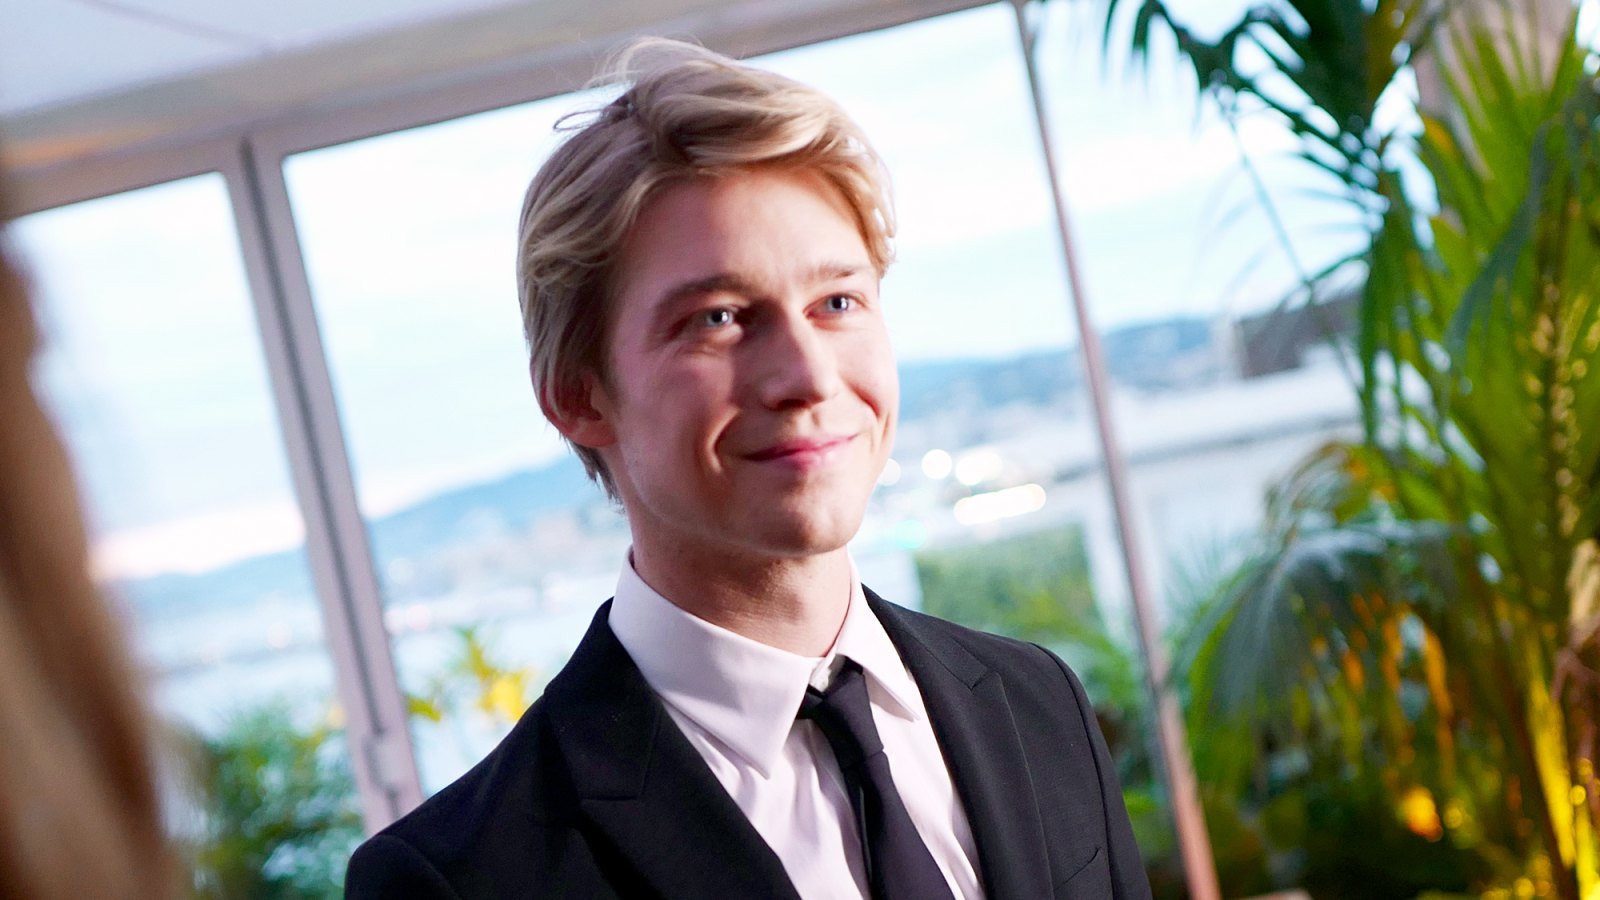 2018 Trophee Chopard laureate Joe Alwyn attends the Trophee Chopard during the 71st annual Cannes Film Festival at Hotel Martinez on May 14, 2018 in Cannes, France.